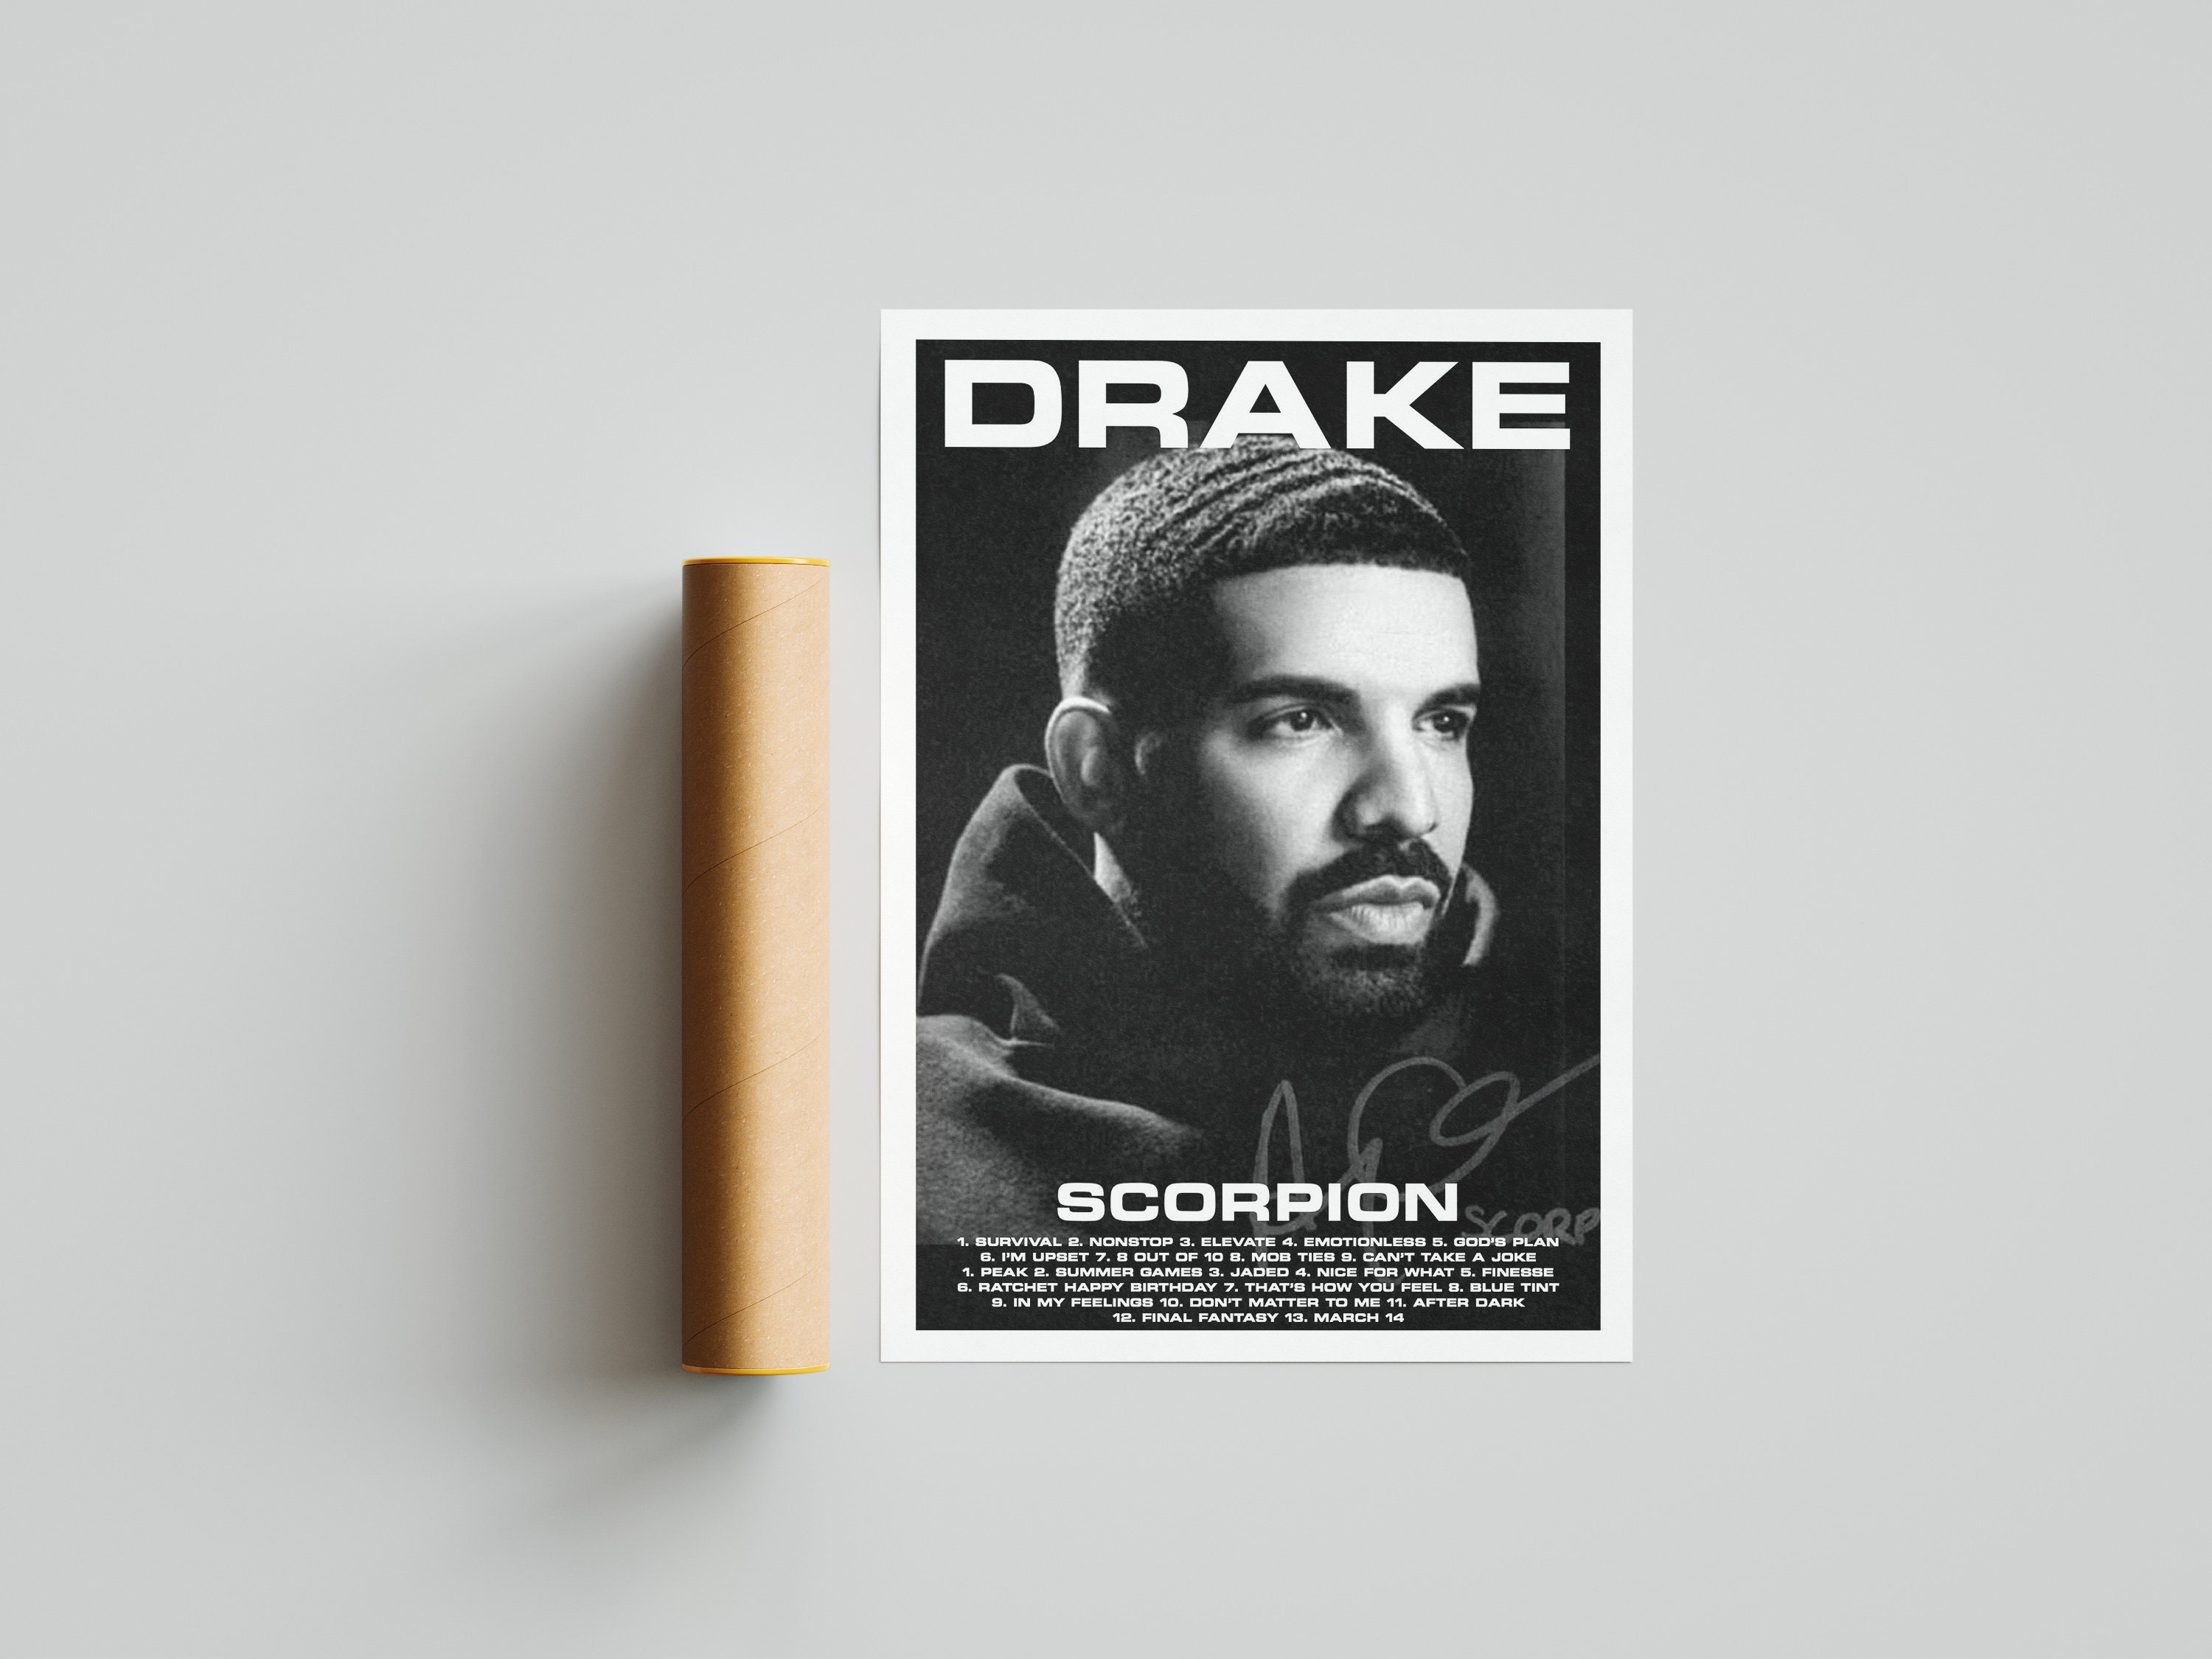 Drake Poster, Scorpion Poster, Album Cover Poster sold by Unattractive  Obscenity, SKU 69130754